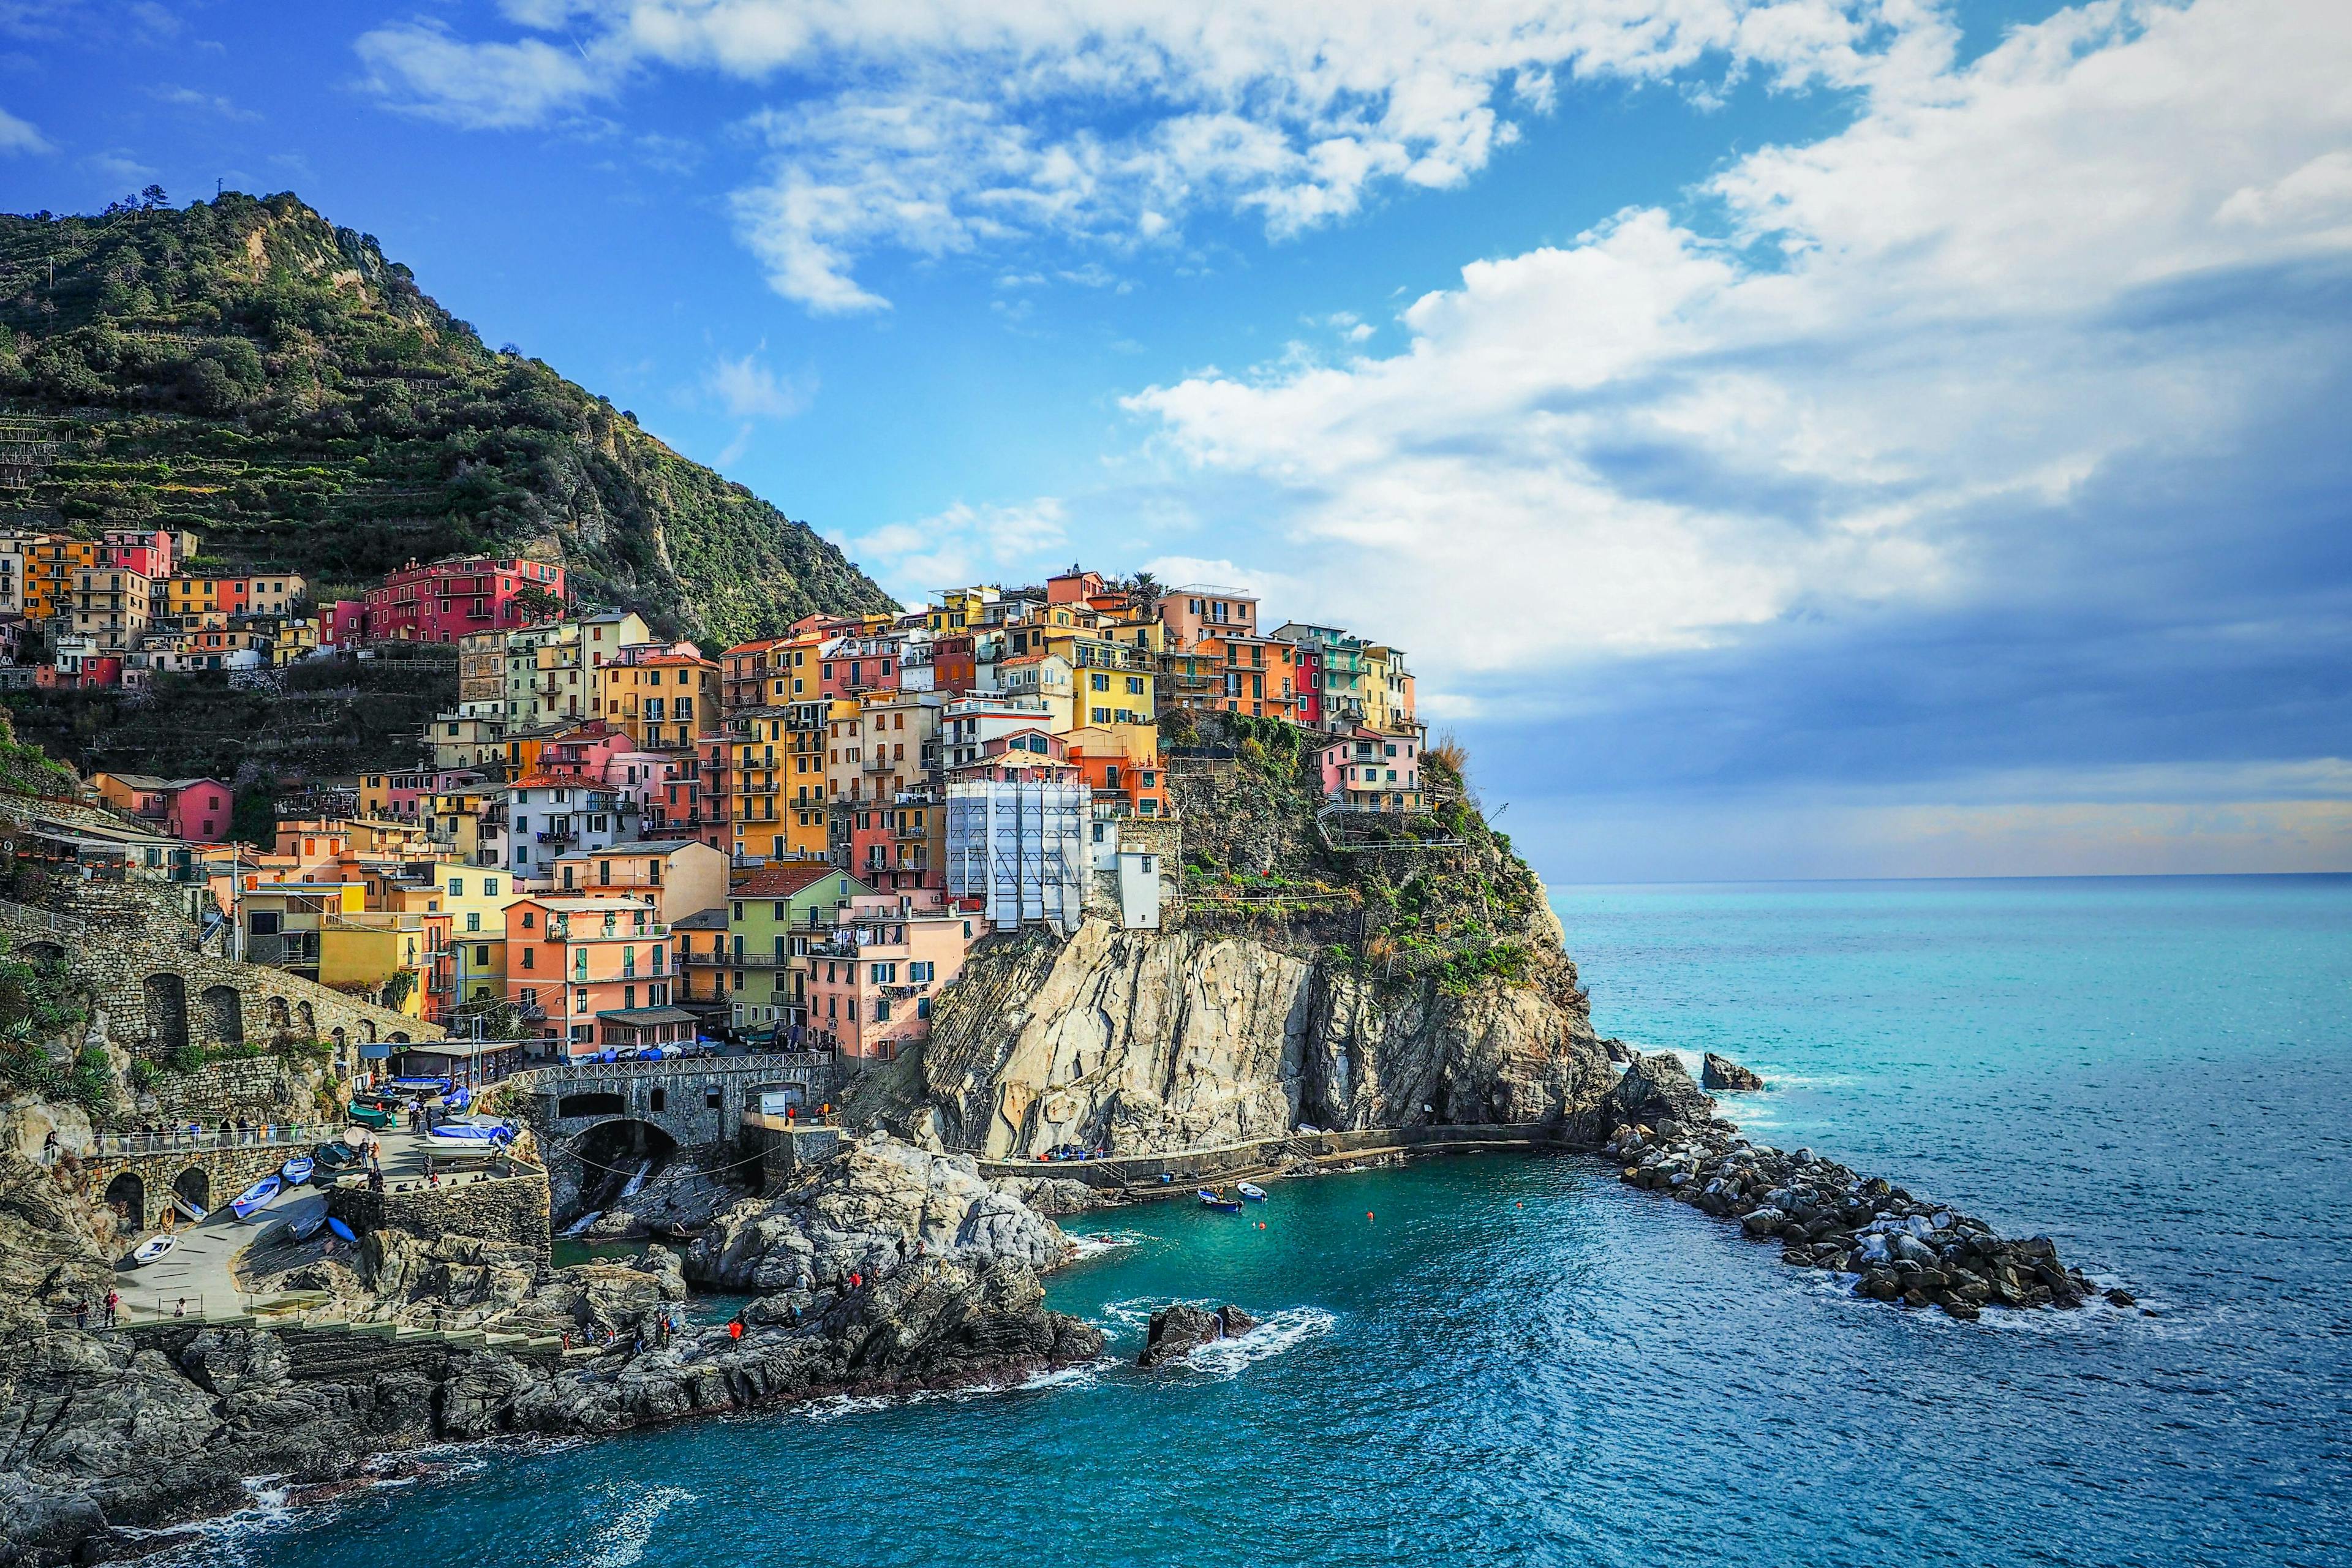 Colorful houses on the coast of Cinque Terre in Italy.